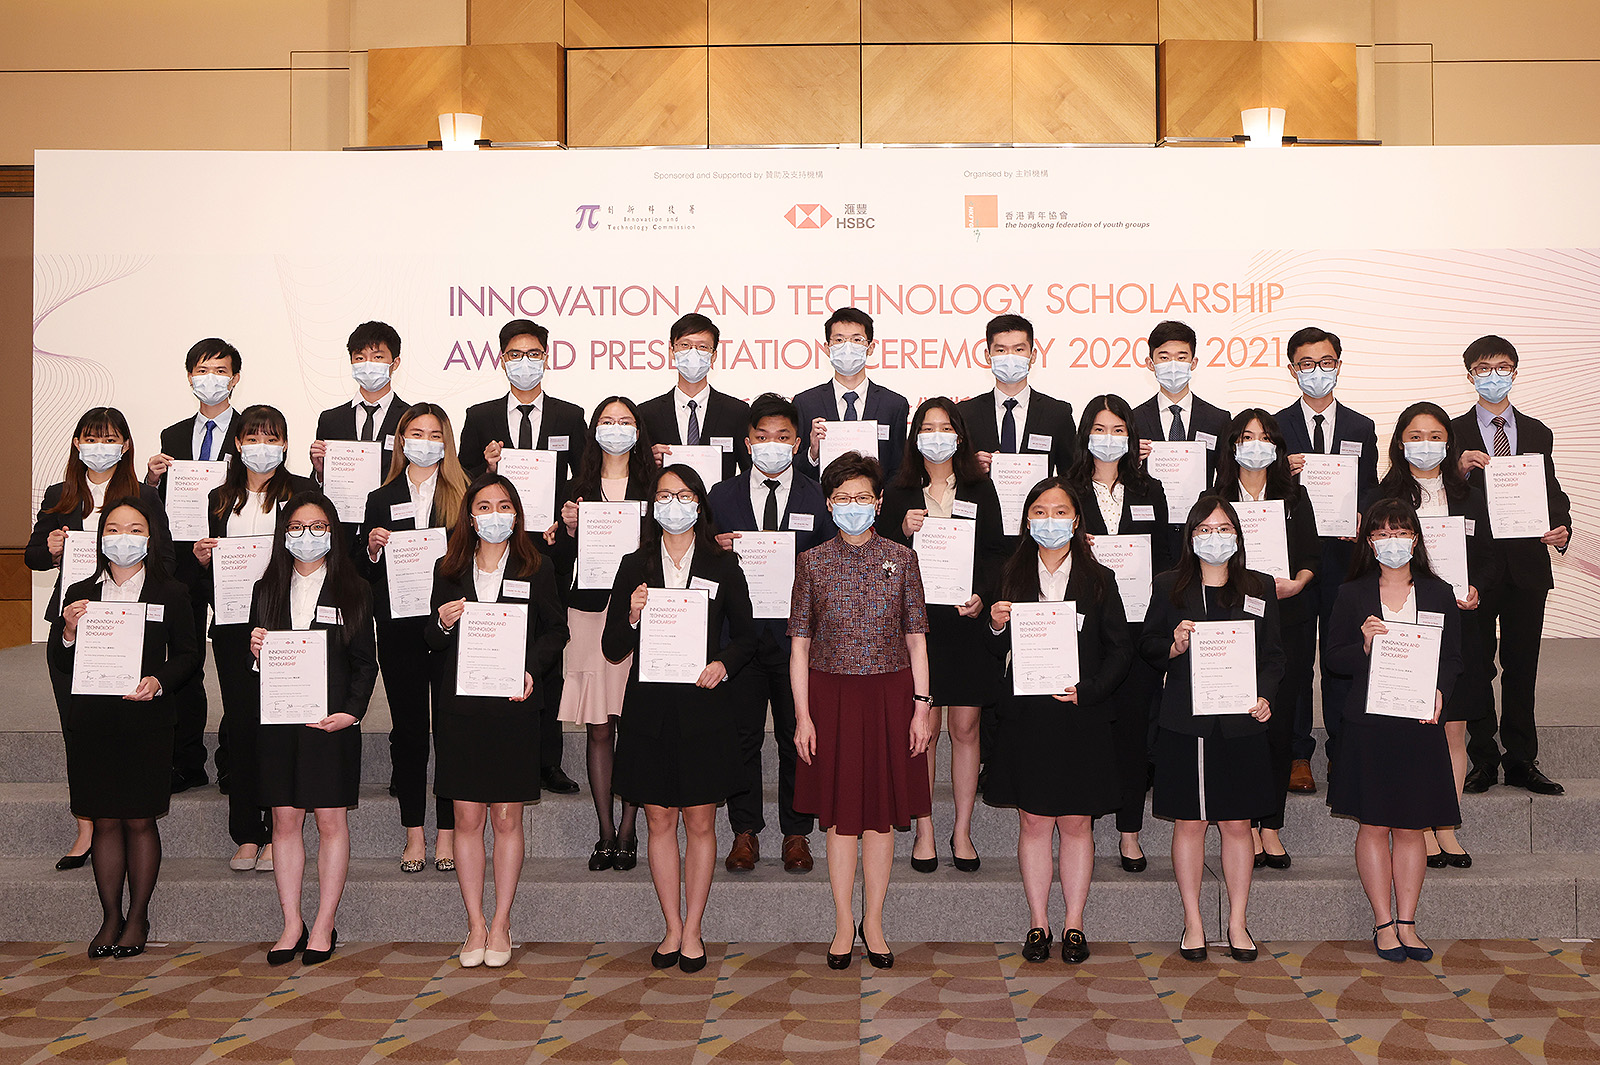 The four CityU awardees, Monica Chan and Harvey Ng (2nd and 5th from left in 2nd row); and Andy Wong and Xavier Yeung (2nd and 3rd from left in 3rd row) received their certificates from the Chief Executive of the HKSAR, Mrs Carrie Lam Cheng Yuet-ngor, at the Innovation and Technology Scholarship Award Presentation Ceremony on 21 June. 